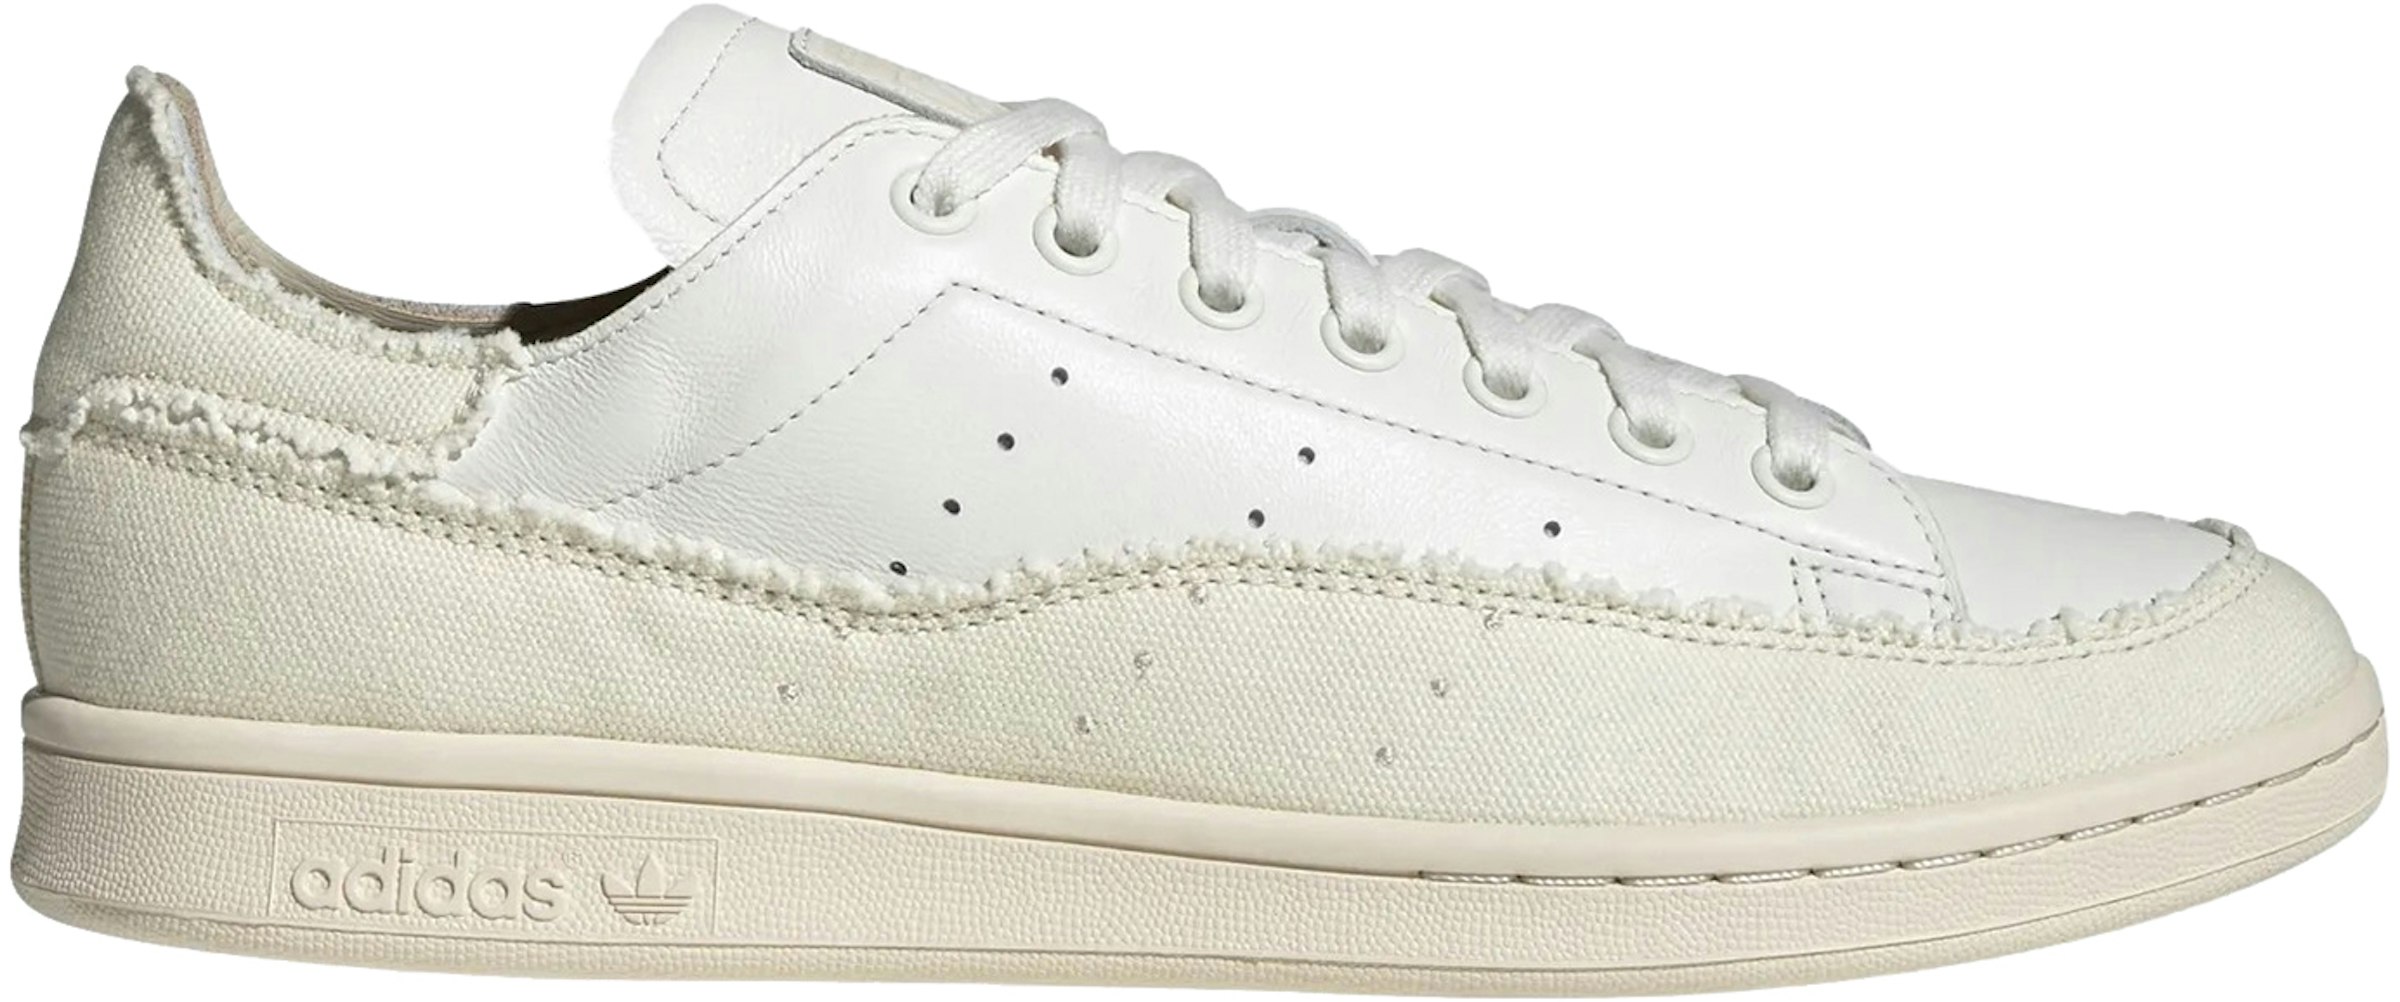 adidas Stan Smith Recon Vintage Fencing Pack GY2549 -